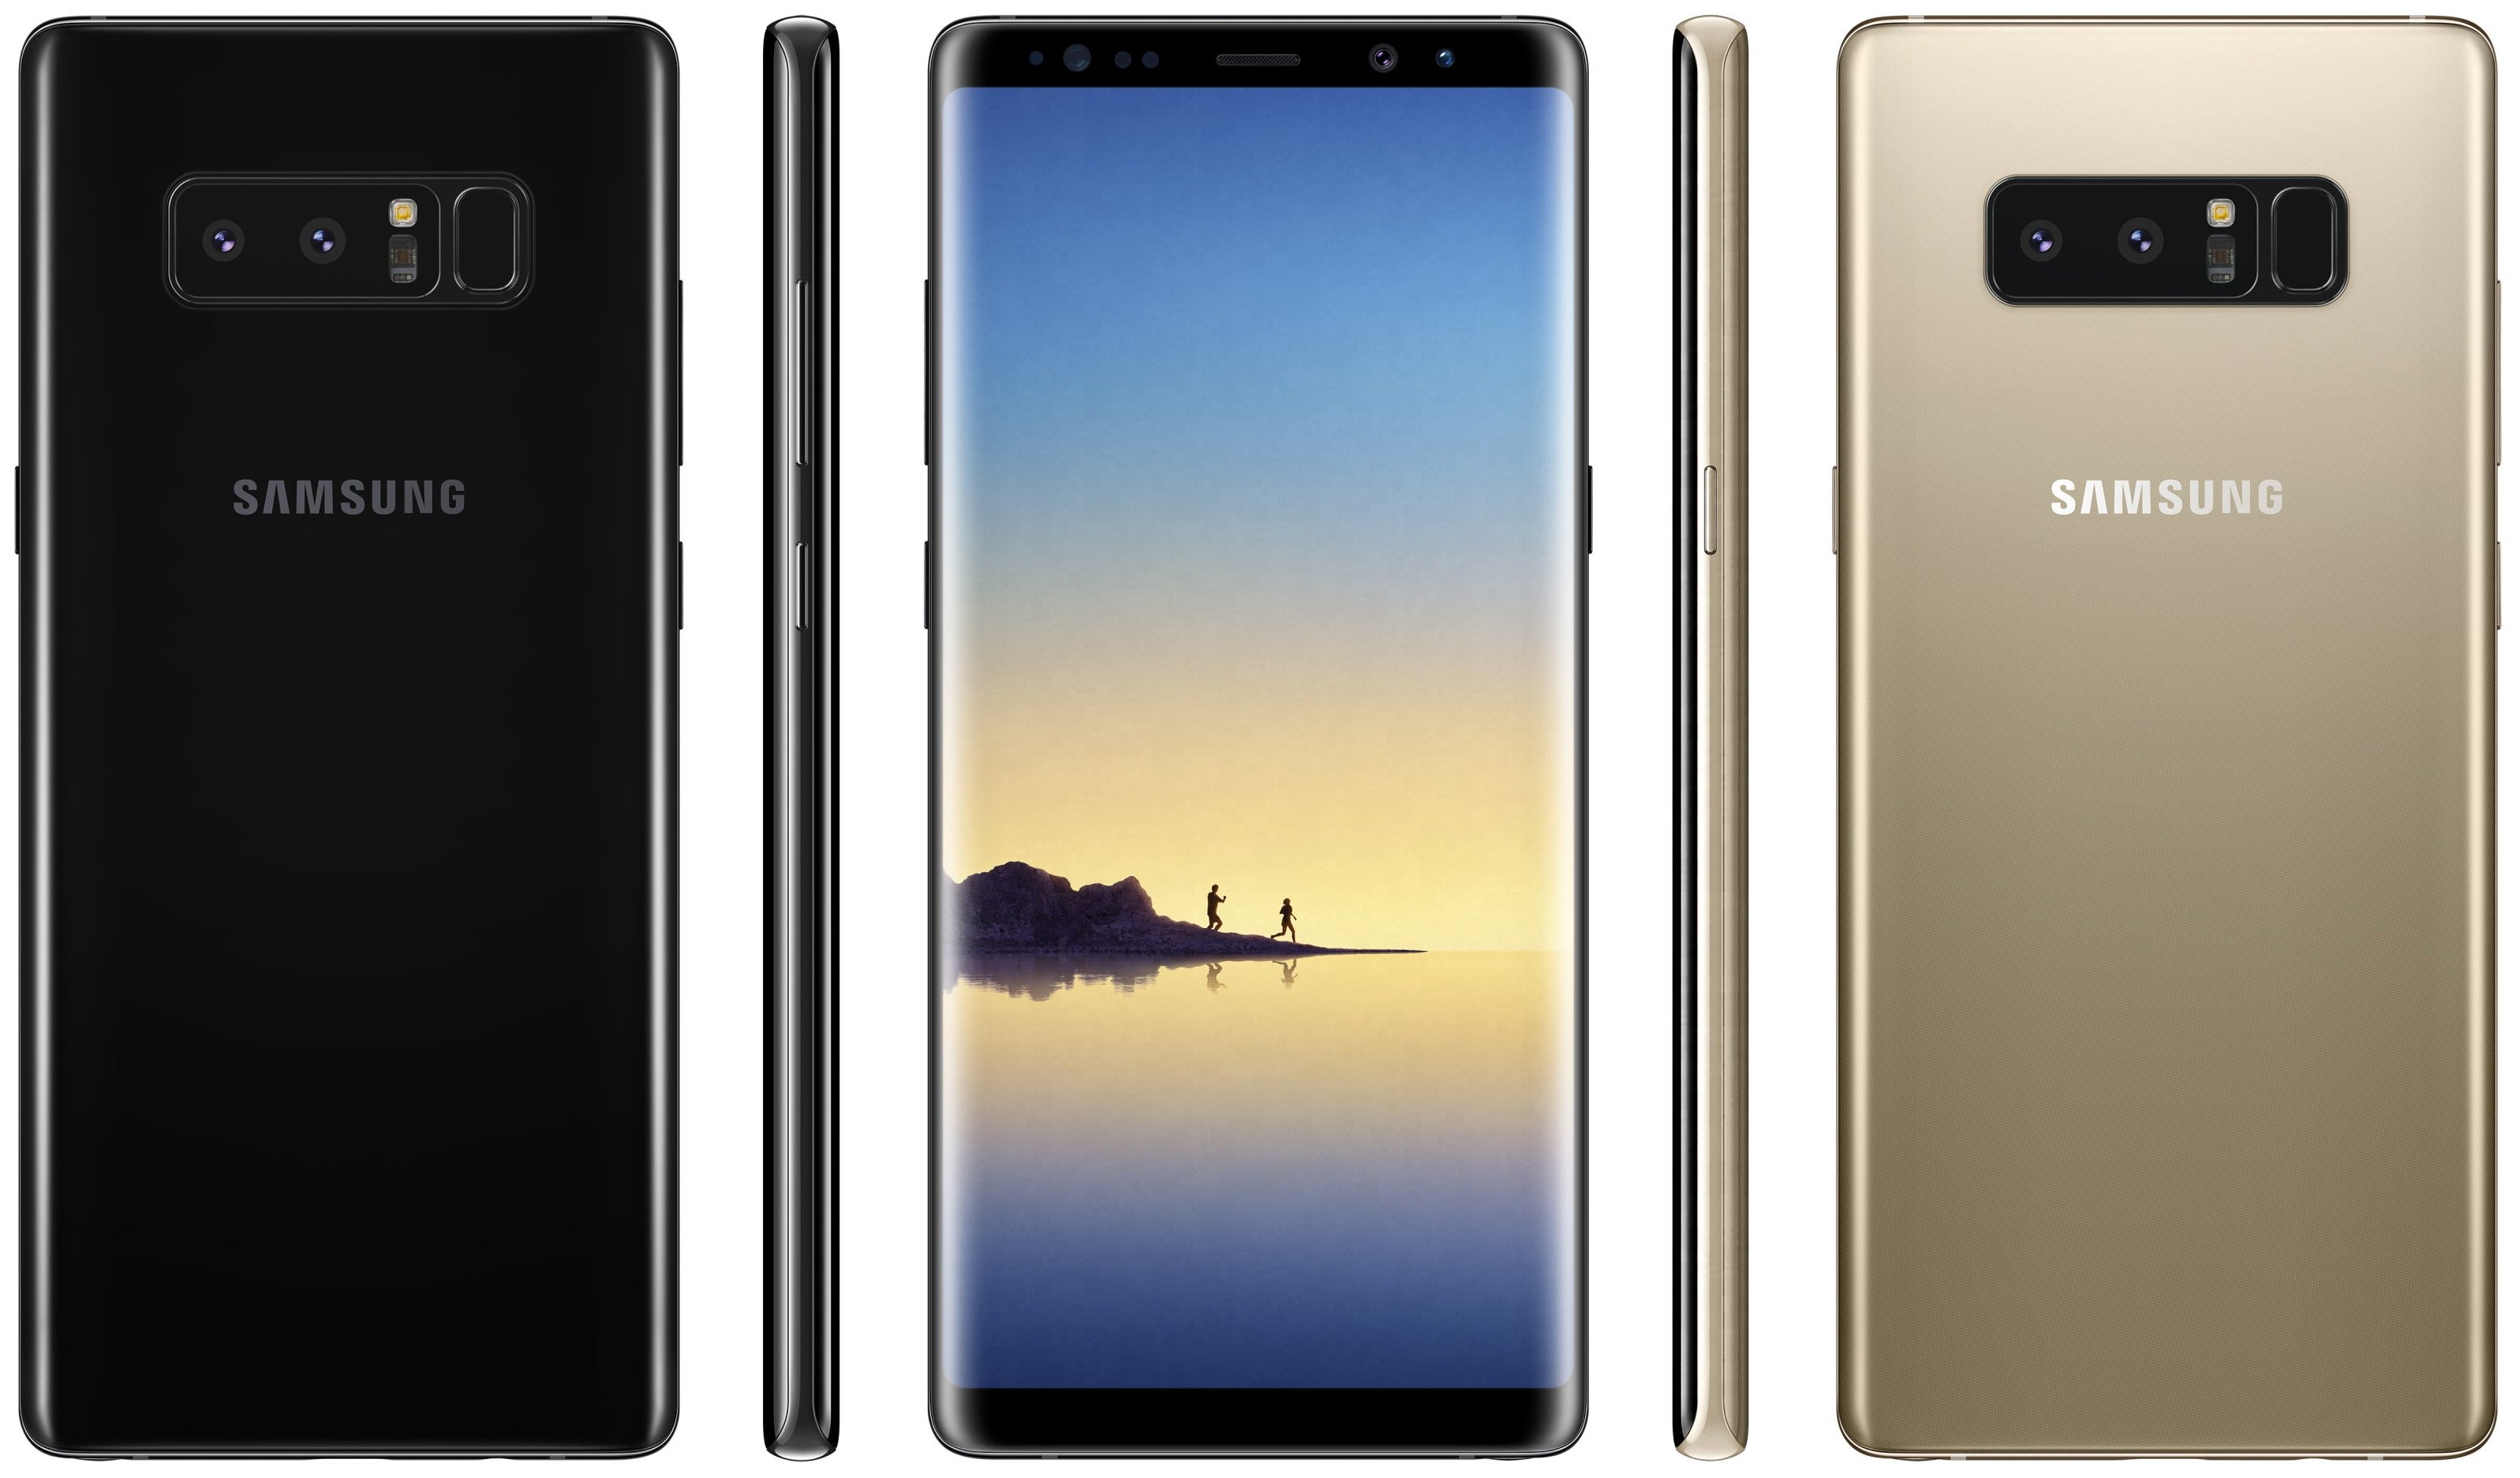 Samsung Galaxy Note 8 to be launched in September, free 256 GB microSD cards offered with pre-orders